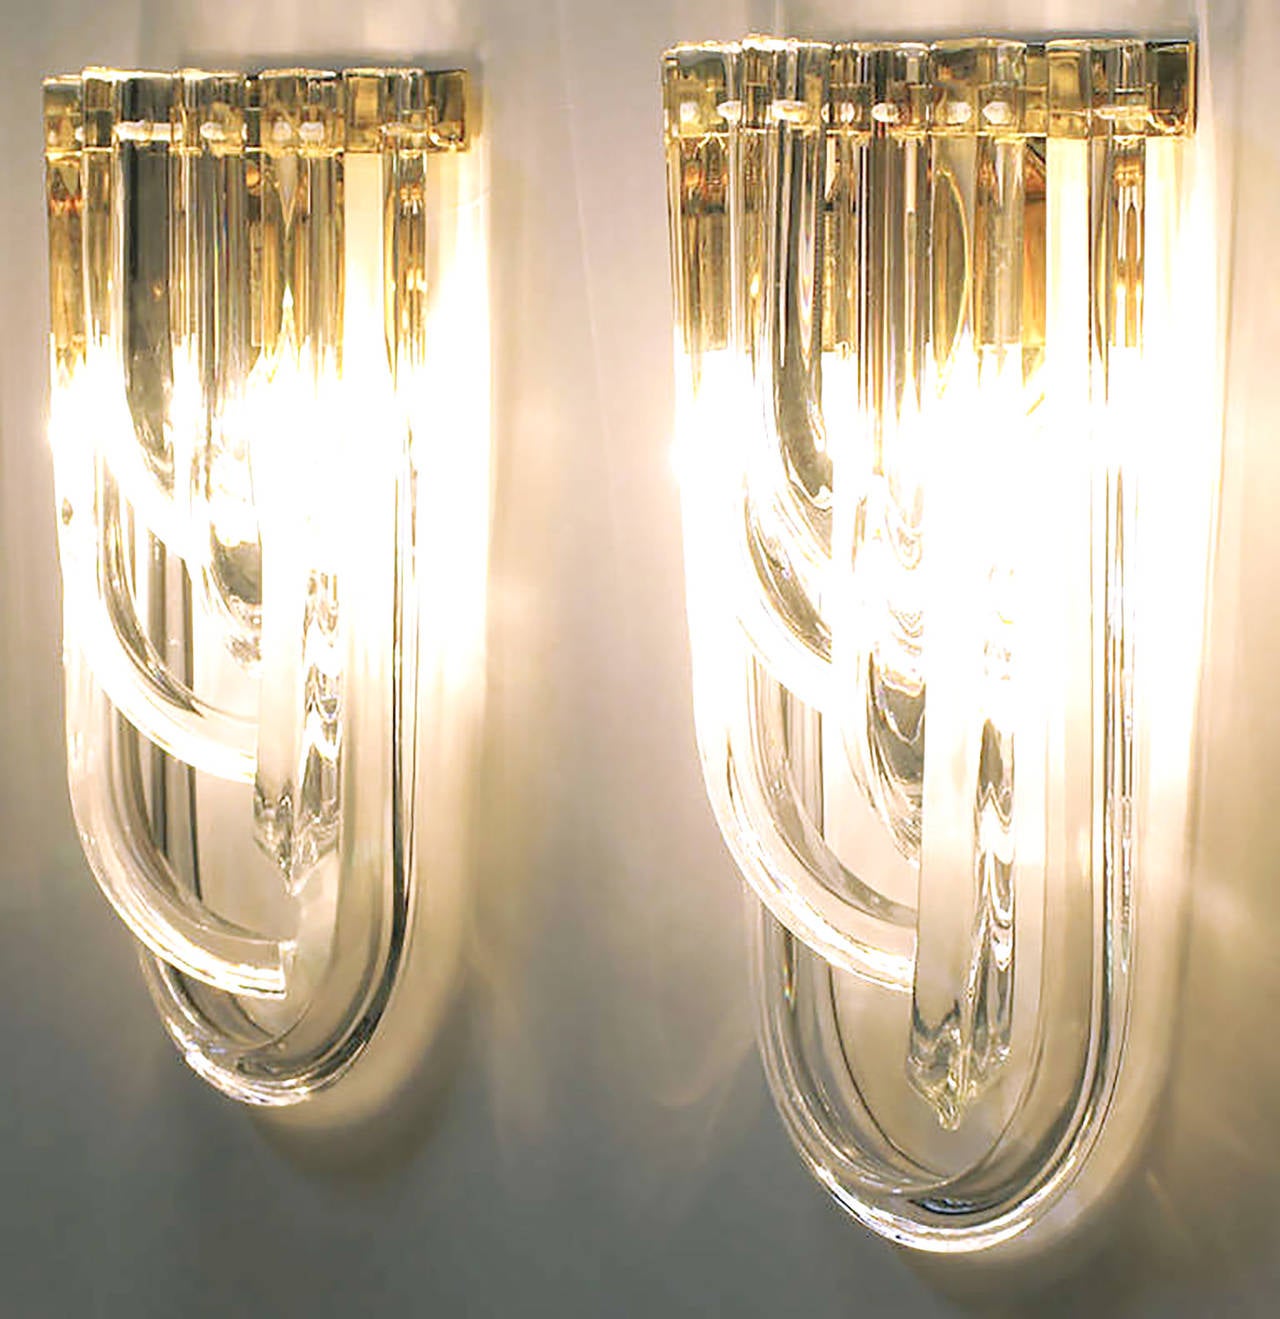 Outstanding and rare pair of Italian bent triangular crystal and brass wall sconces from Venini. One U-shape crystal with offset descending J-shape crystals. Brass demilune frame with two candelabra base light sockets. Multiple pairs available.